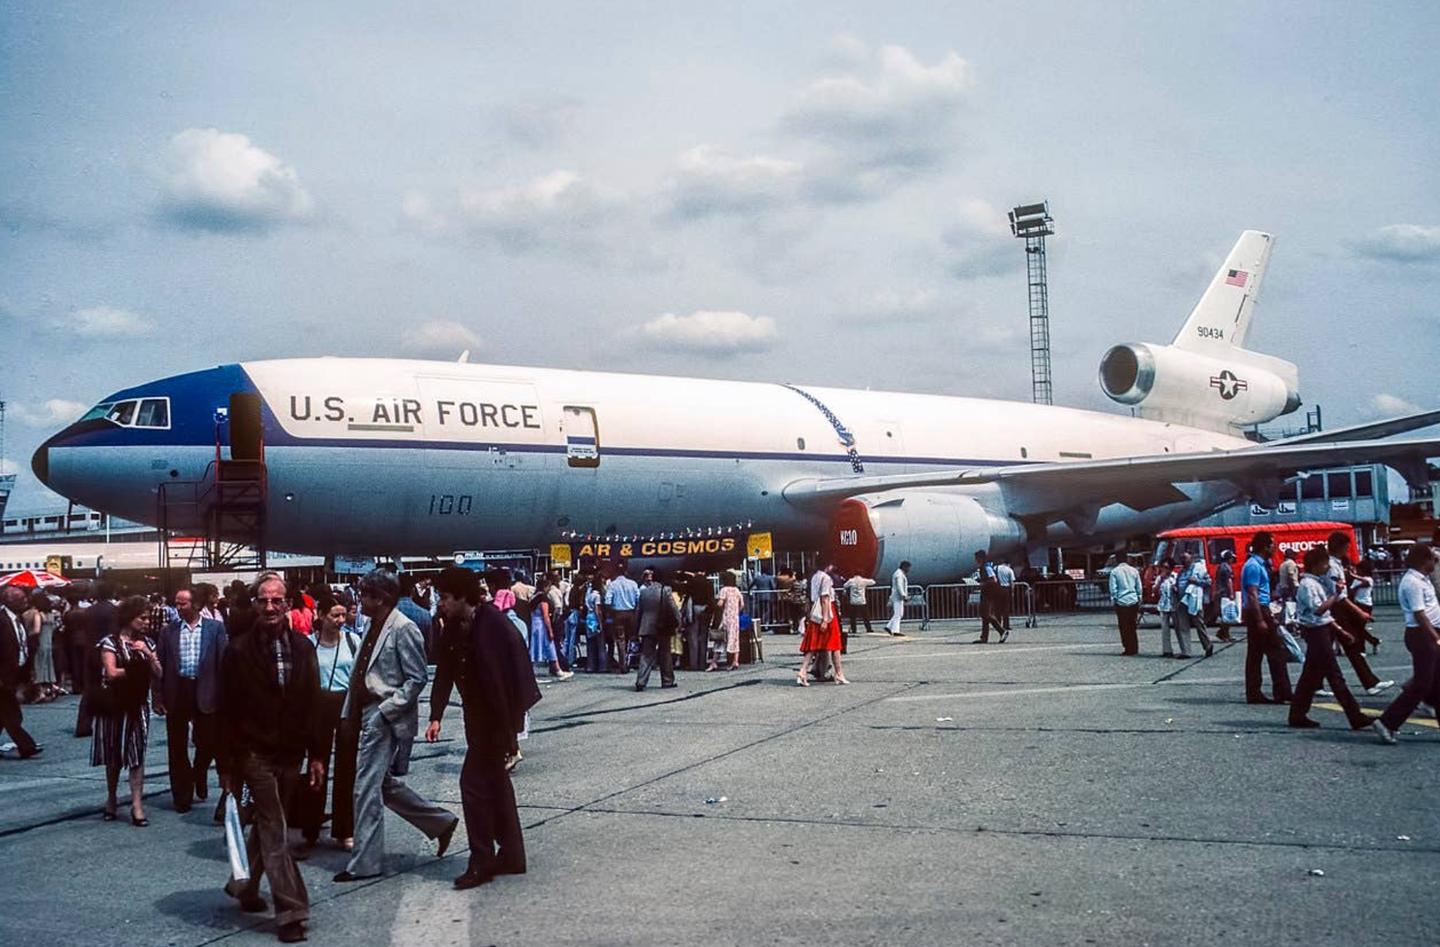 A KC-10A seen at the Paris Air Show in 1981, wearing its original airliner-style livery.&nbsp;<em>Acroterion/Wikicommons</em>